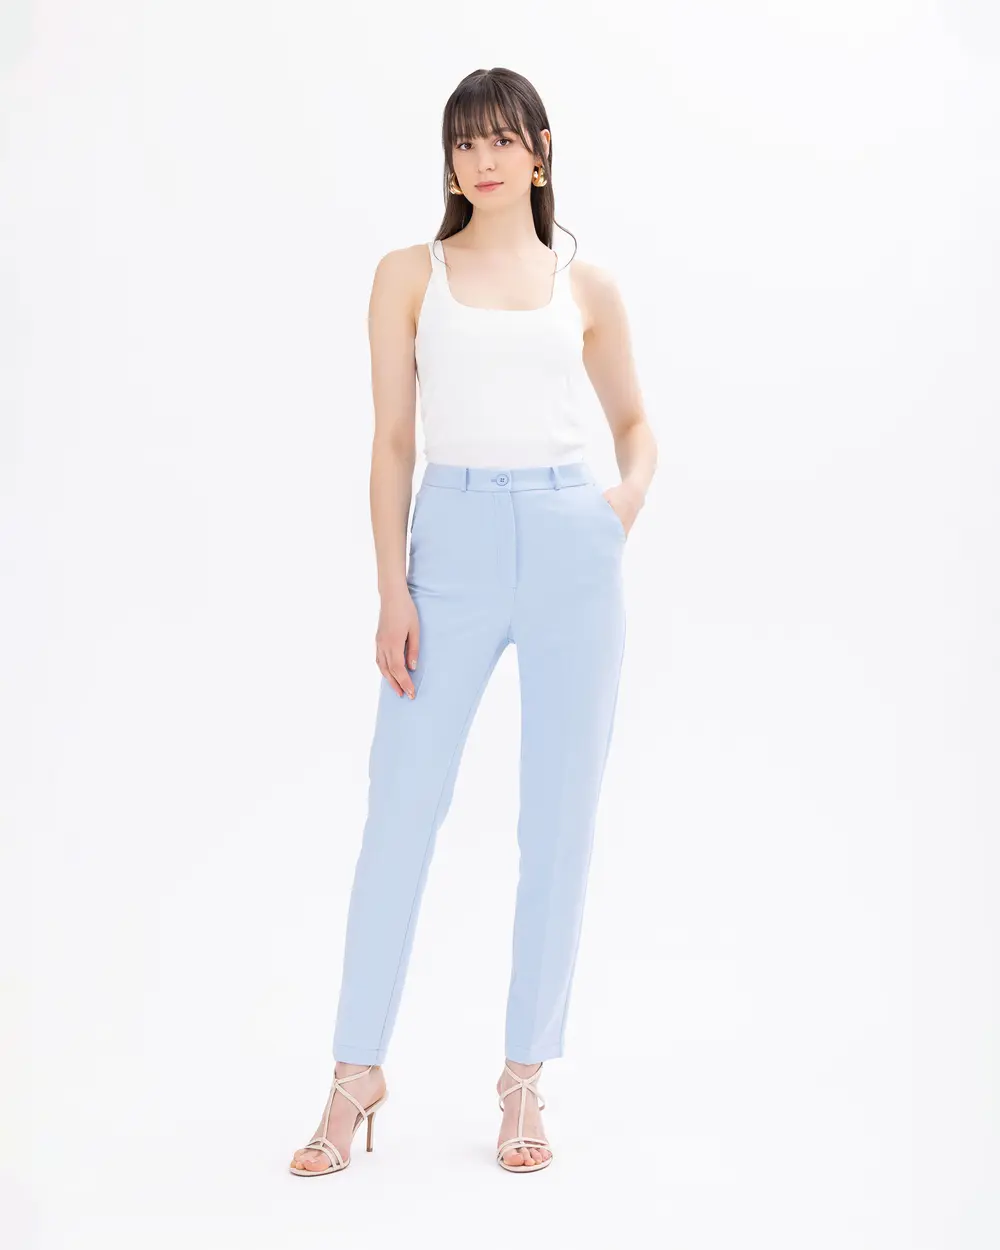 Buttoned Ankle Length Pants